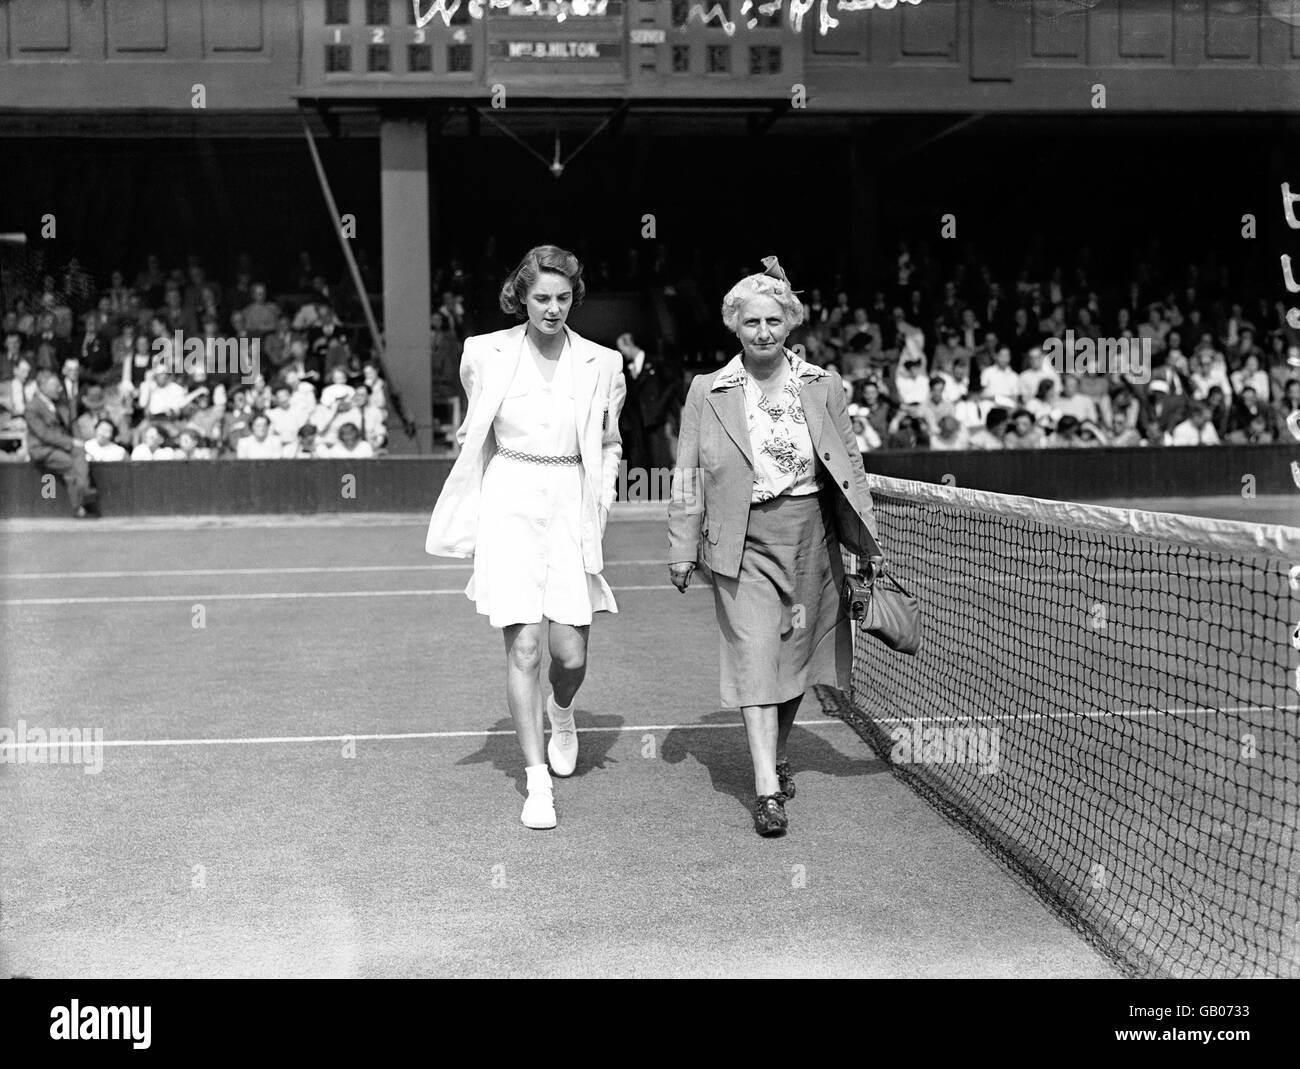 (L-R) Kay Menzies and Hazel Wightman, the donor of the Wightman Cup, walk onto centre court Stock Photo